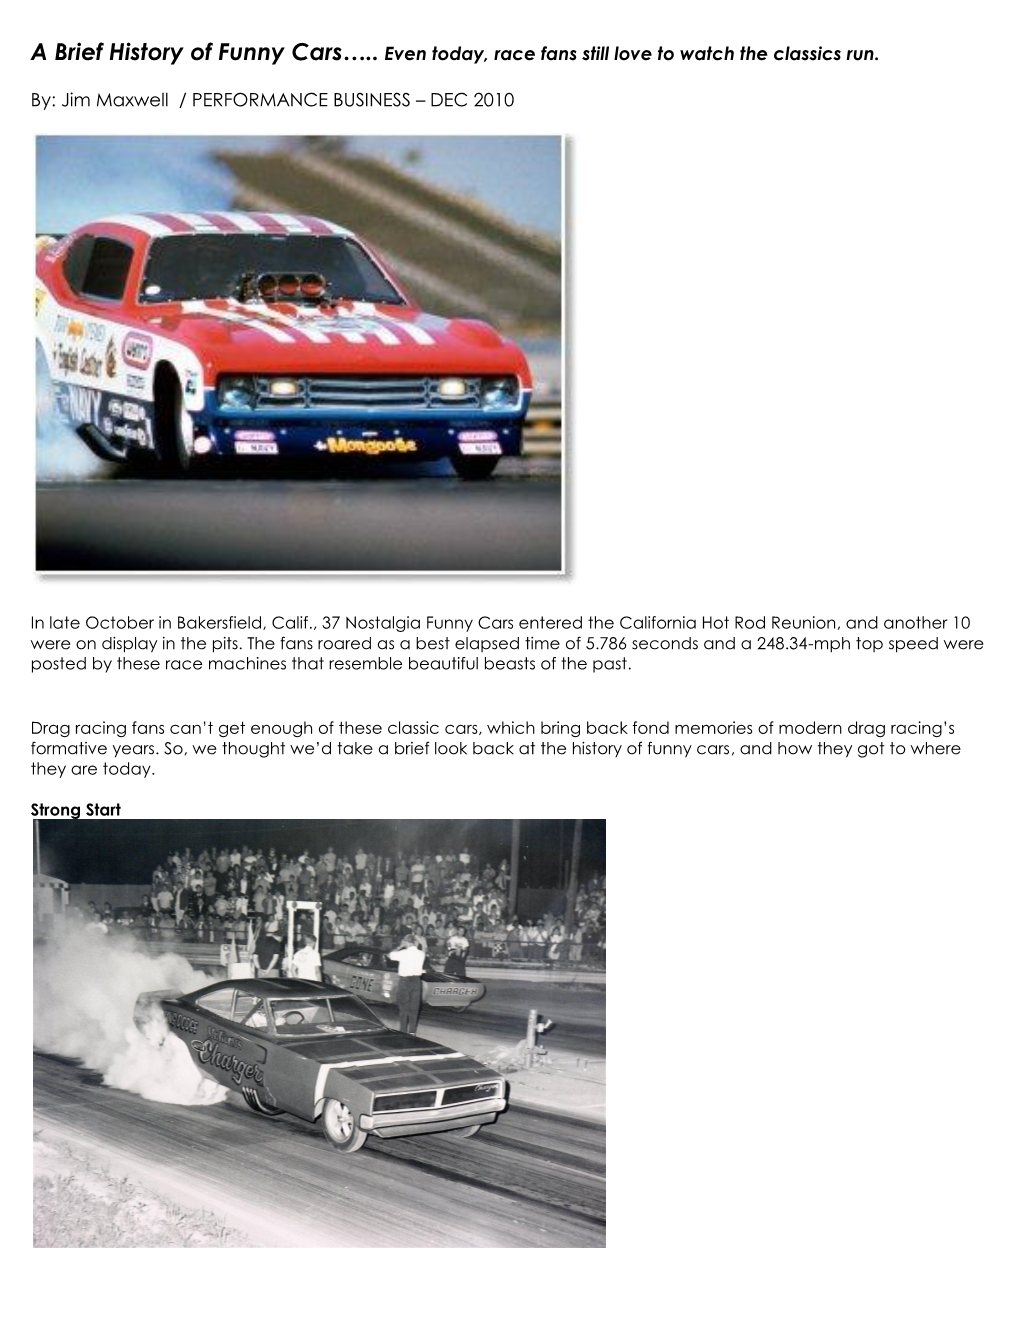 A Brief History of Funny Cars….. Even Today, Race Fans Still Love to Watch the Classics Run